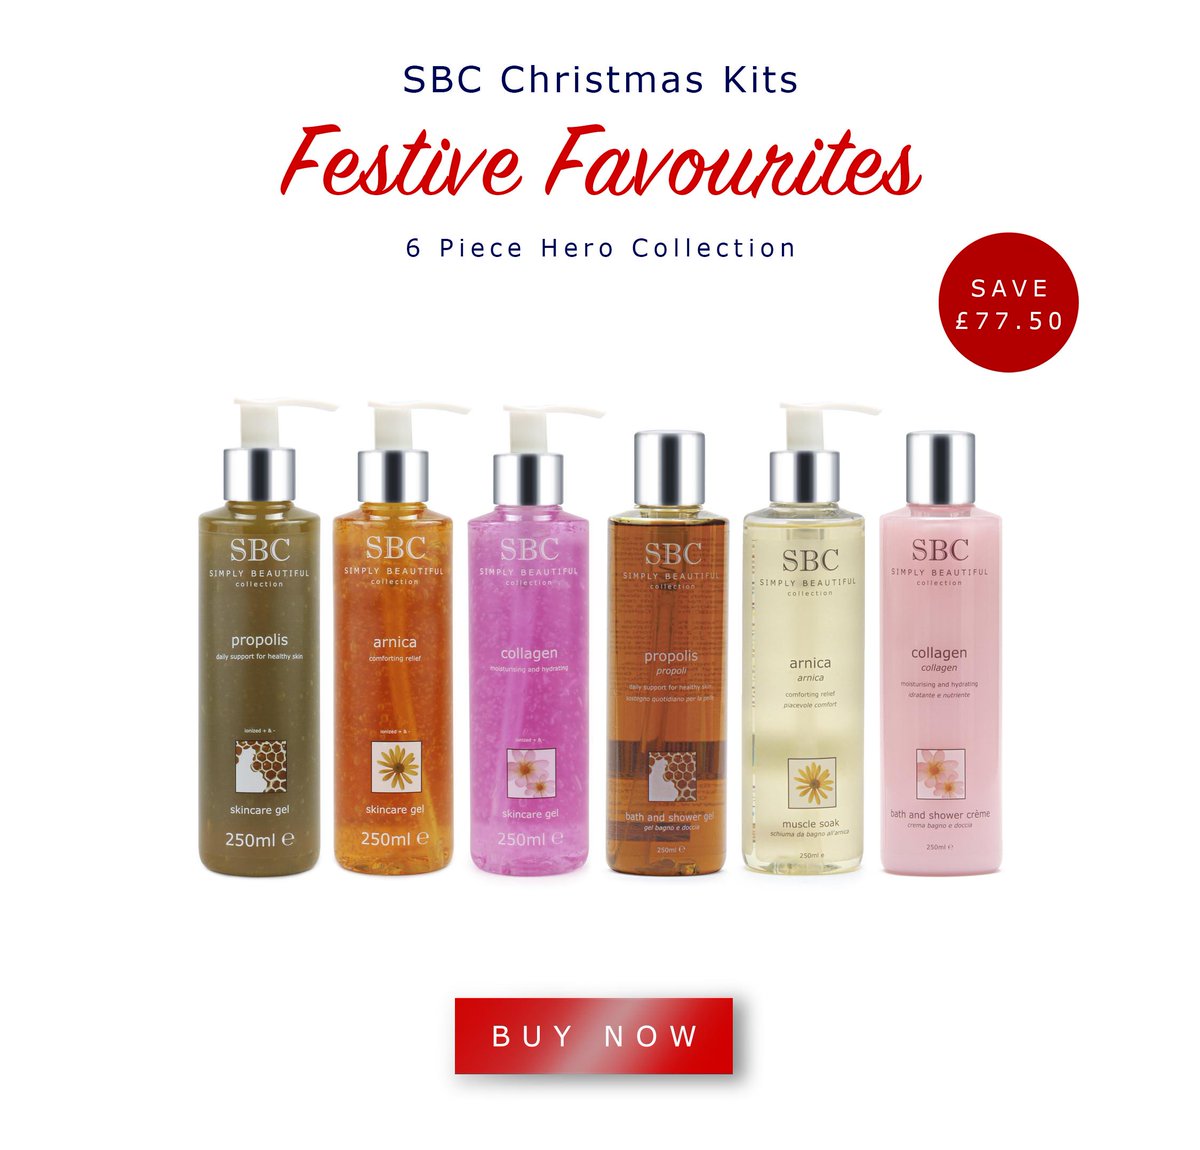 🎅🌟For your chance to #win our Festive Favourites Christmas Kit, Like & Retweet this post 🌟🎅 Closes 14.12.17 🎅🌟#Competition #FestiveFavourites #Christmas #Skincare #Christmas2017 #Beauty #ChristmasCountdown